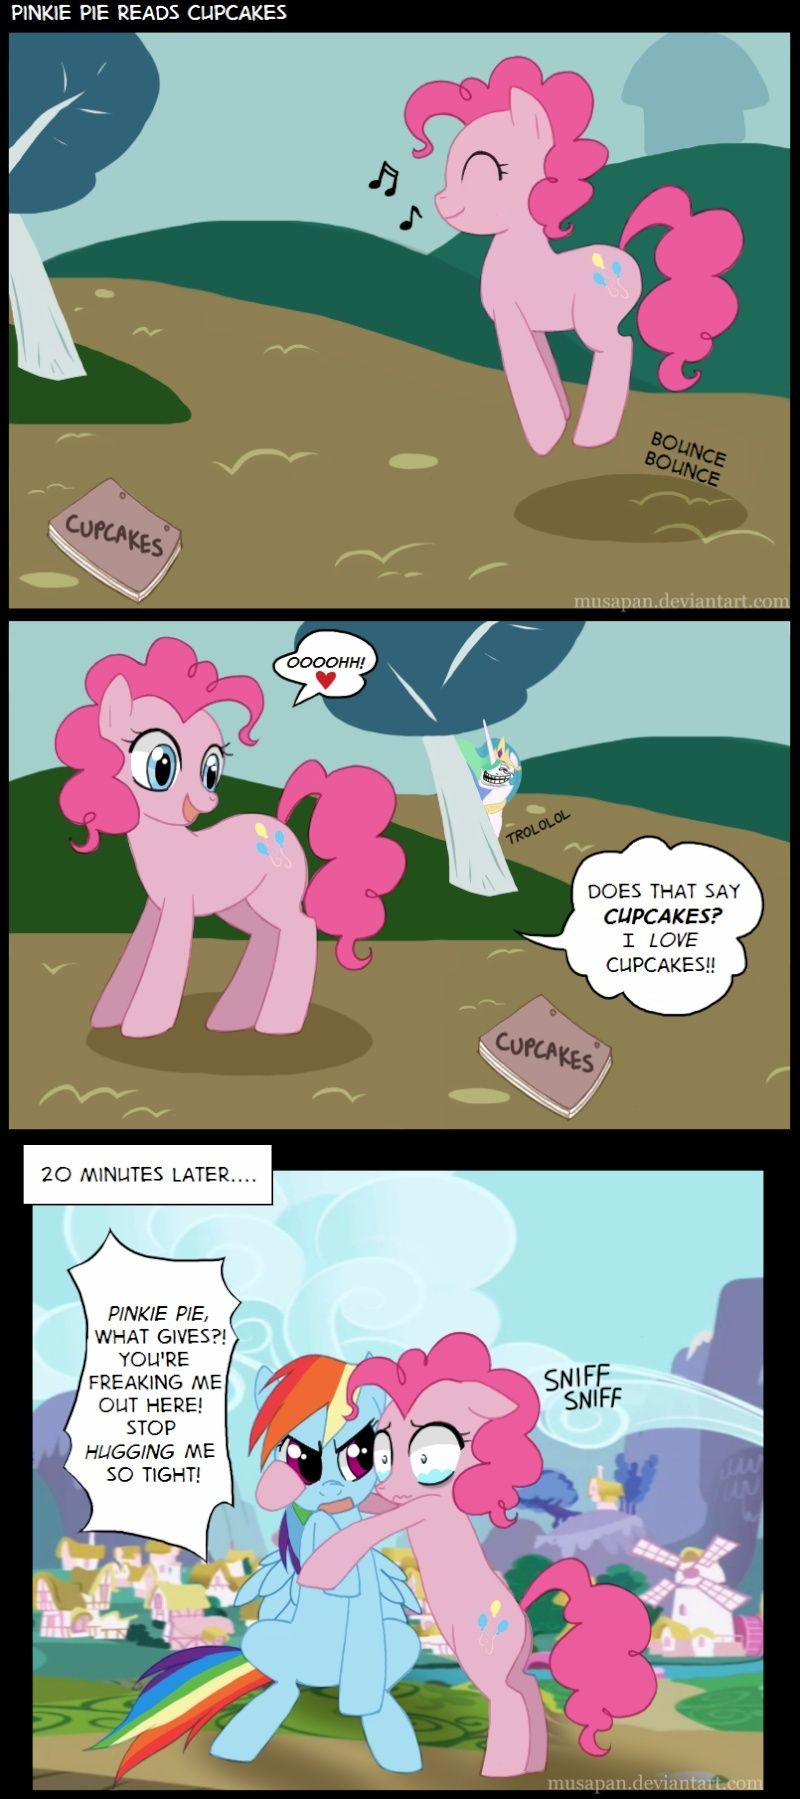 Vos plus jolies images. - Page 4 Pinkie11